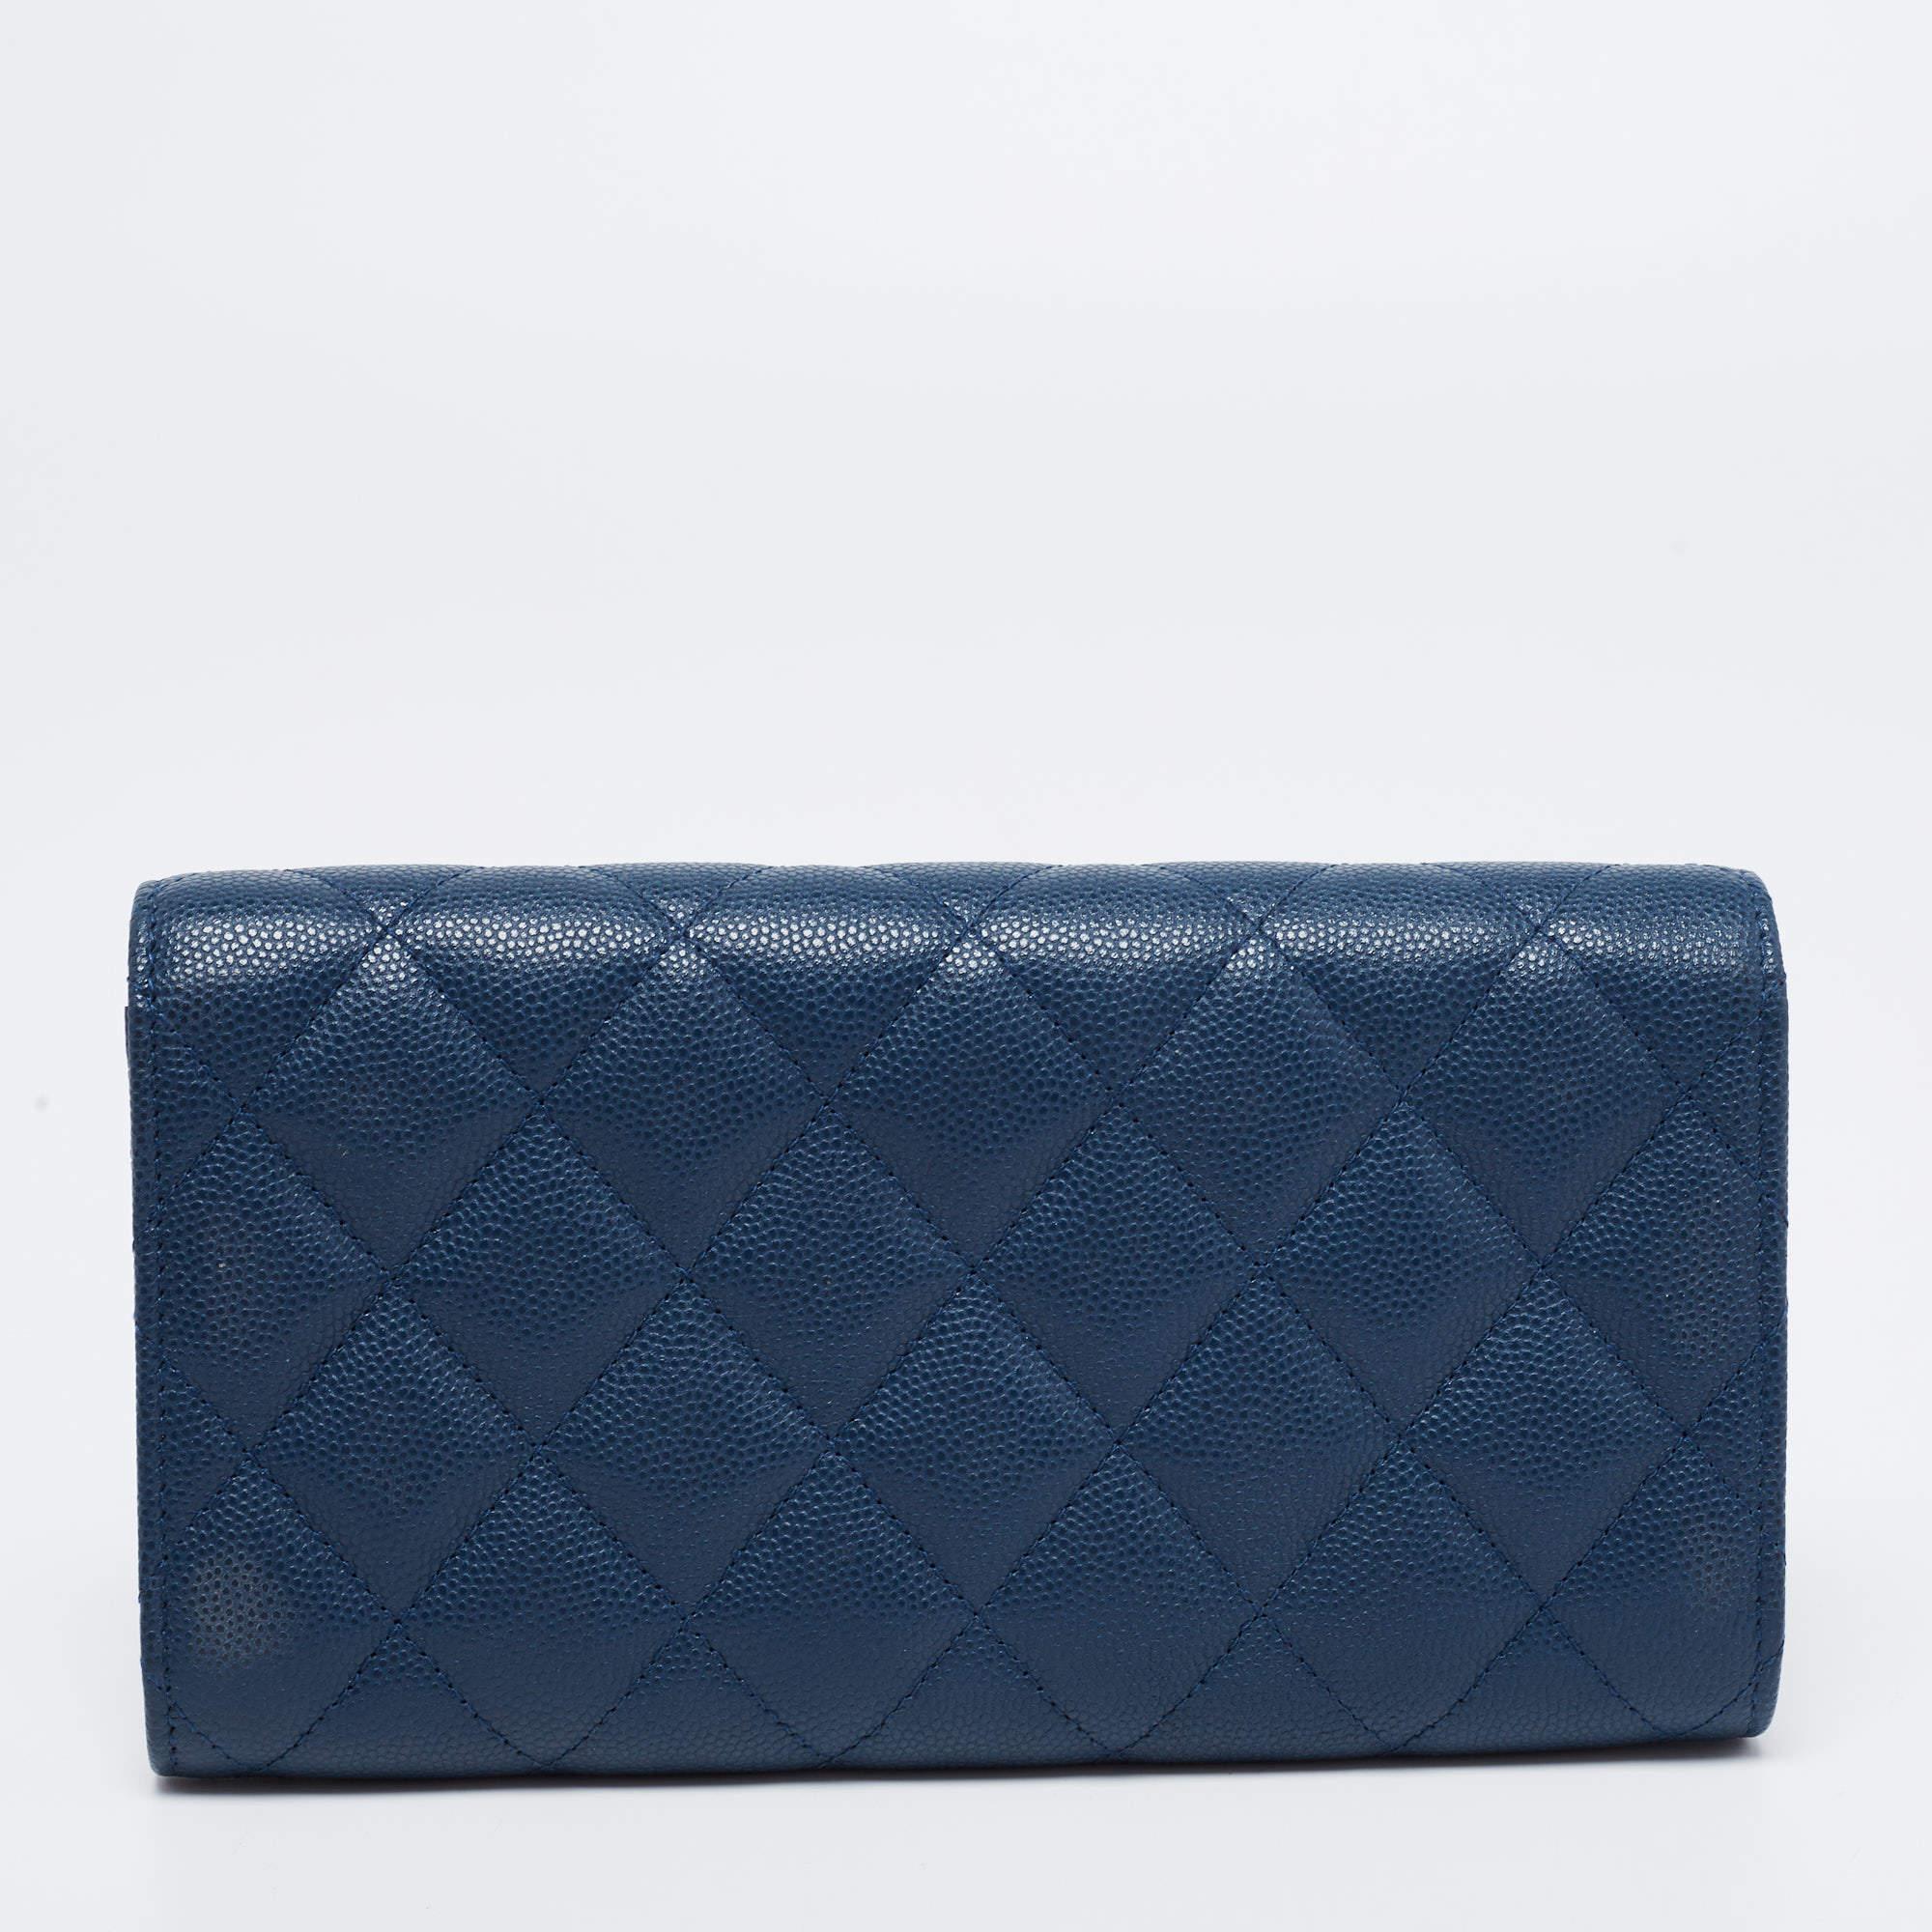 This Classic Flap wallet is enriched with historic details and functional elements. It can be conveniently carried around, and it is adorned with silver-tone accents. With a refined construction, it comes made from quilted leather, and the signature